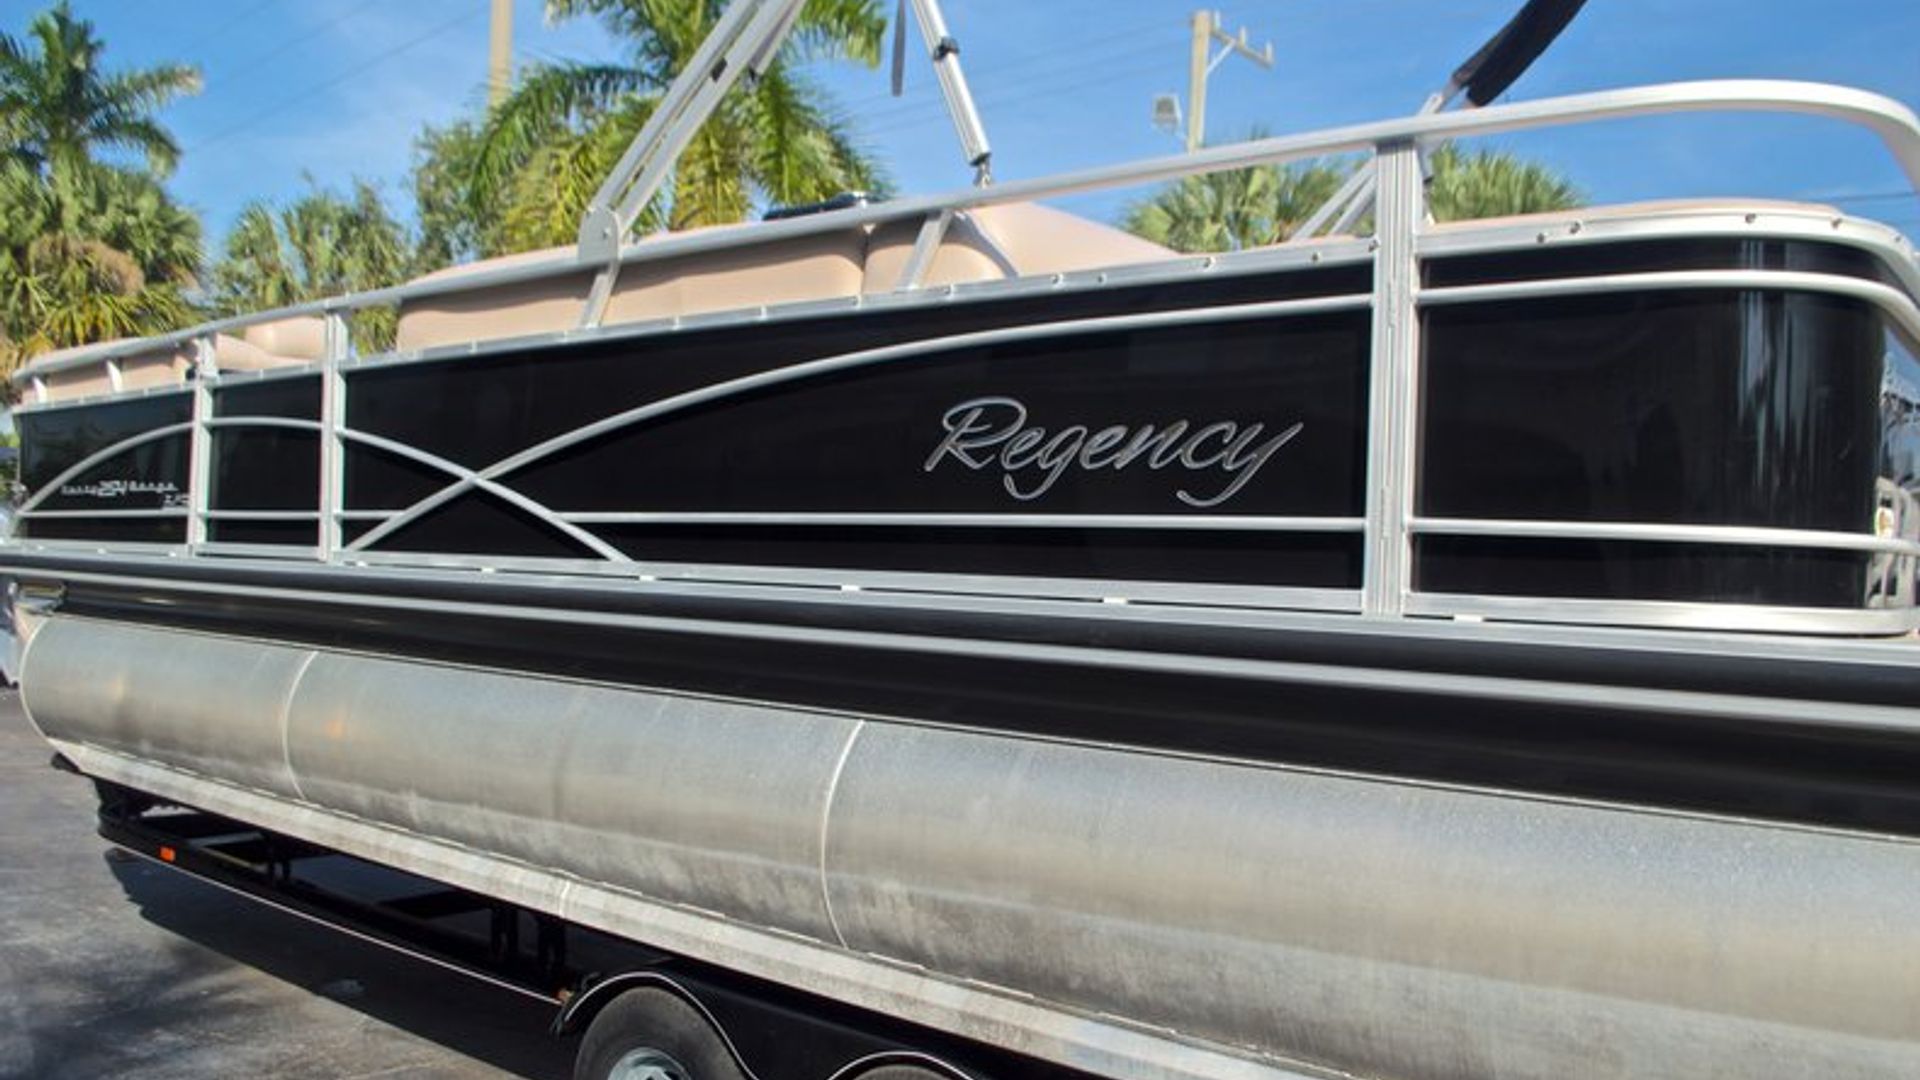 Used 2014 Regency Party Barge 254 XP3 #8806 image 8